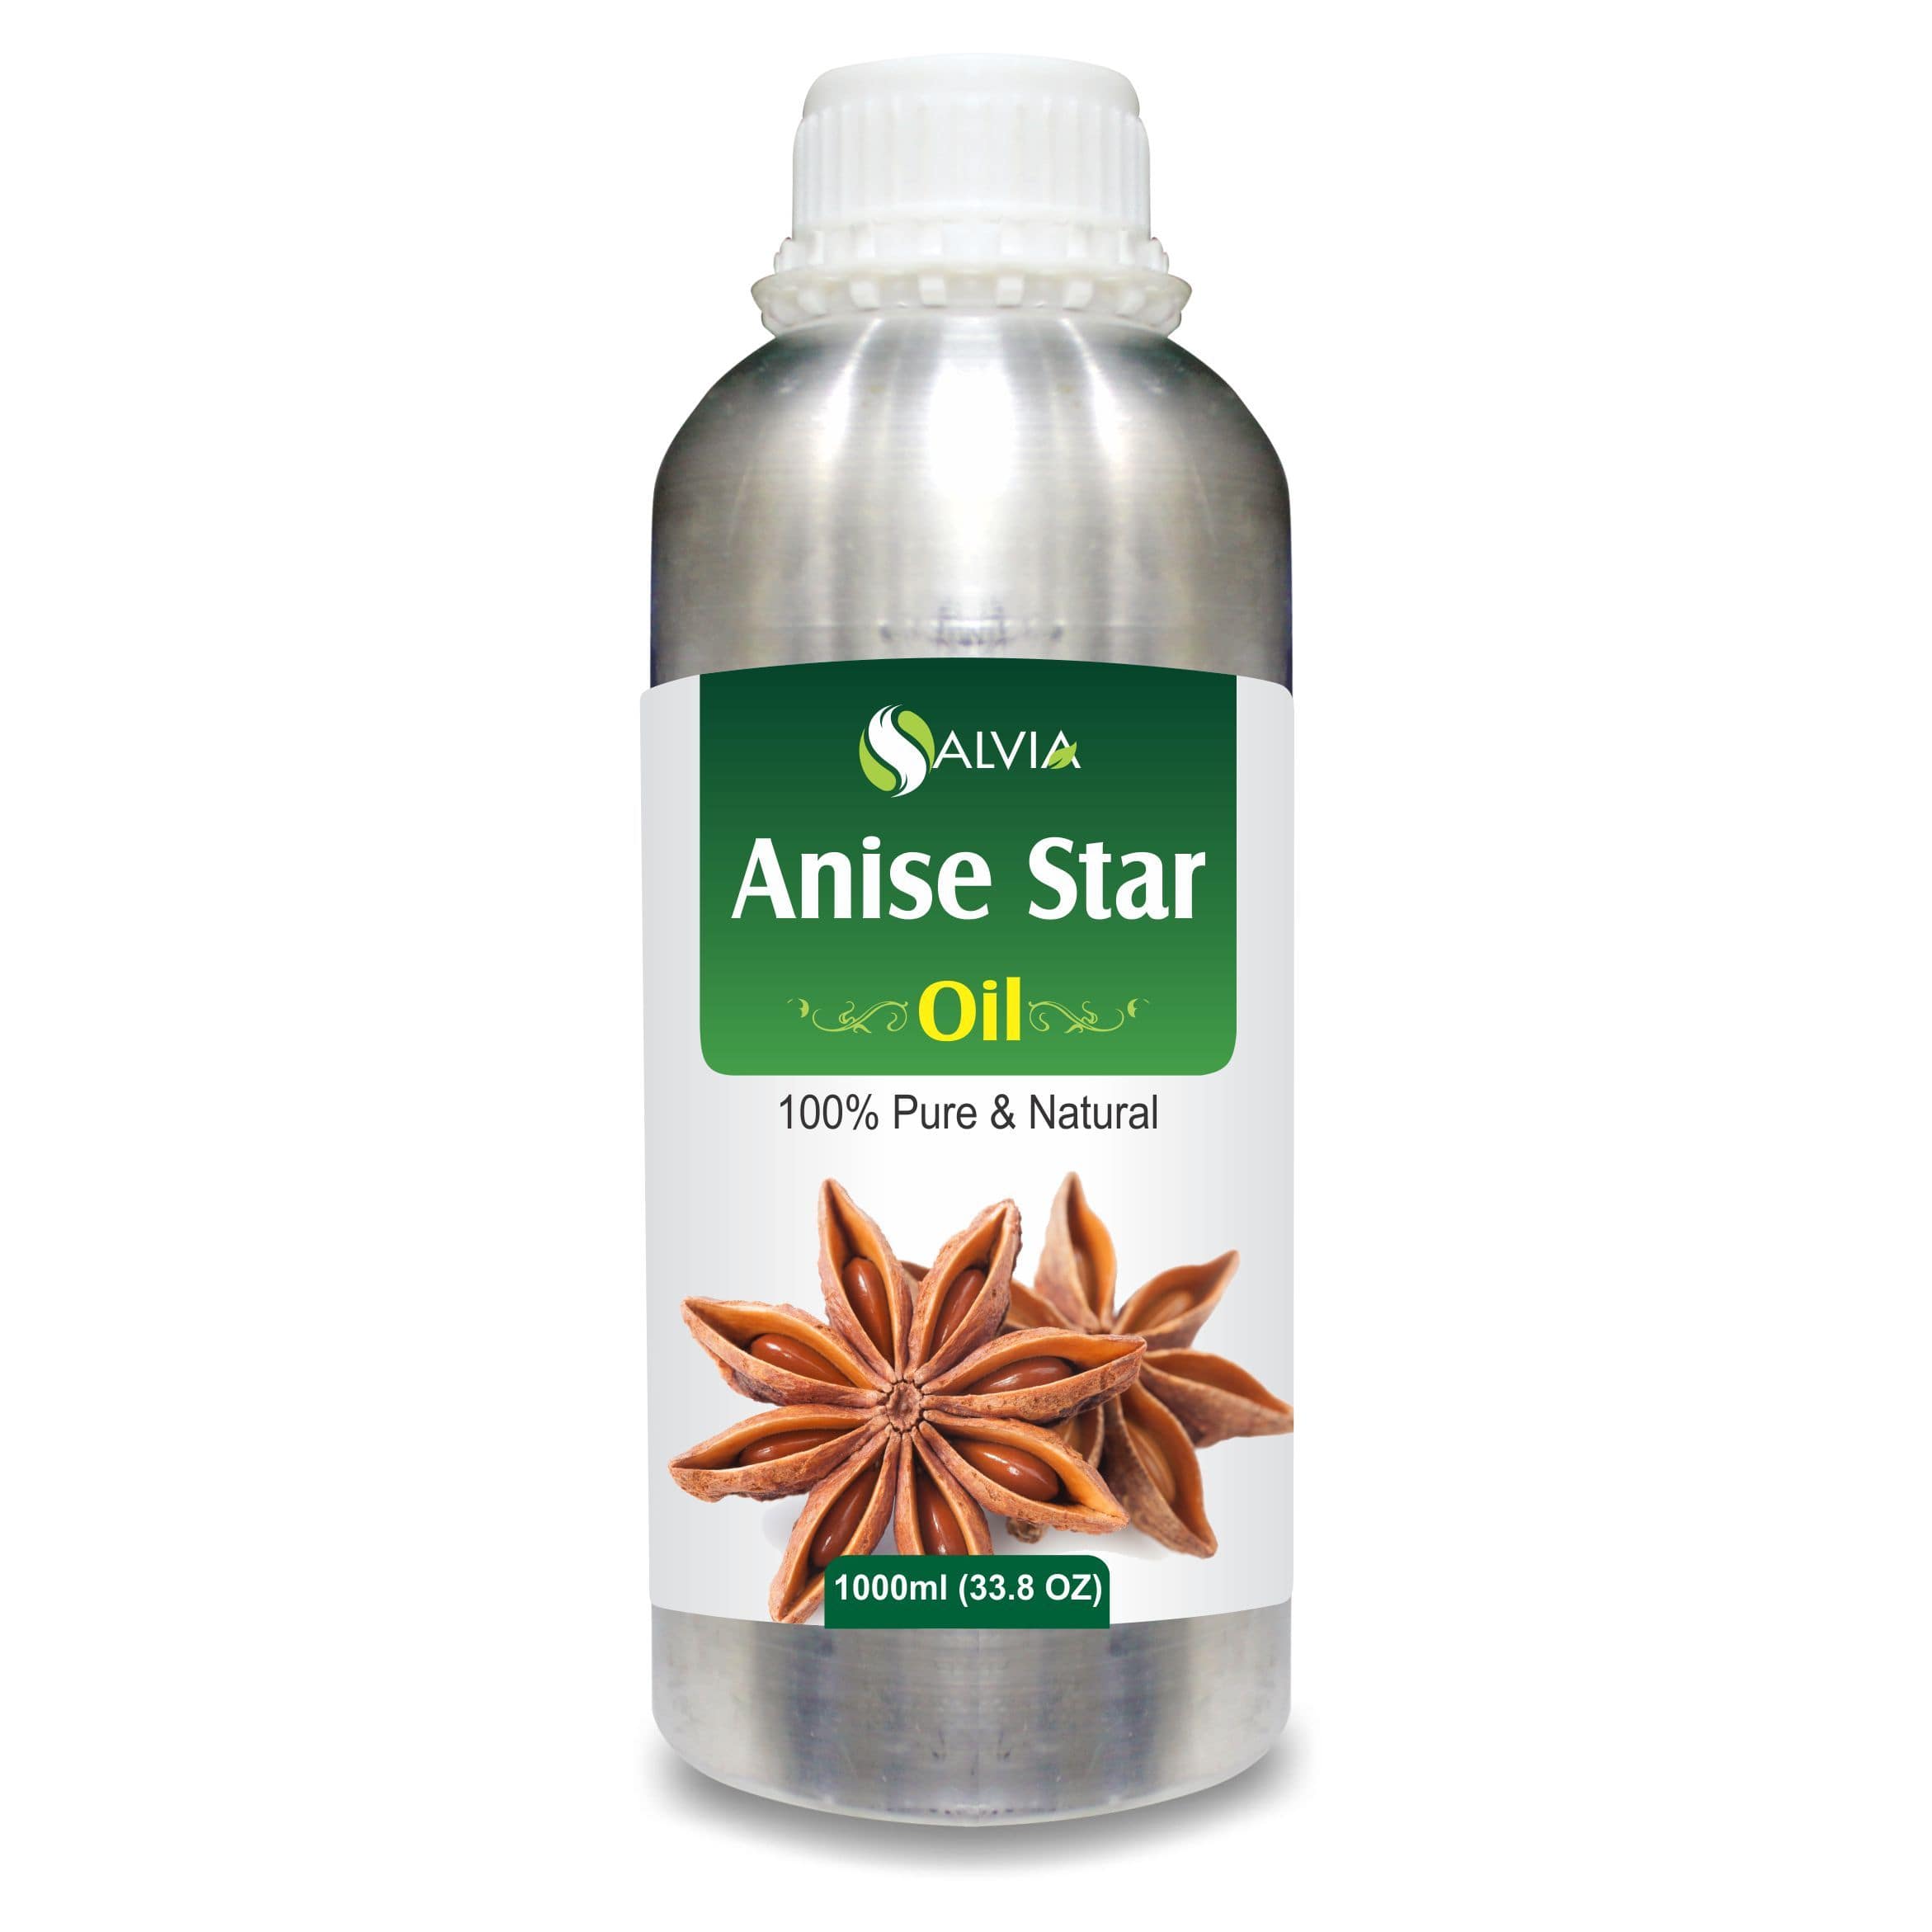 anise essential oil benefits skin